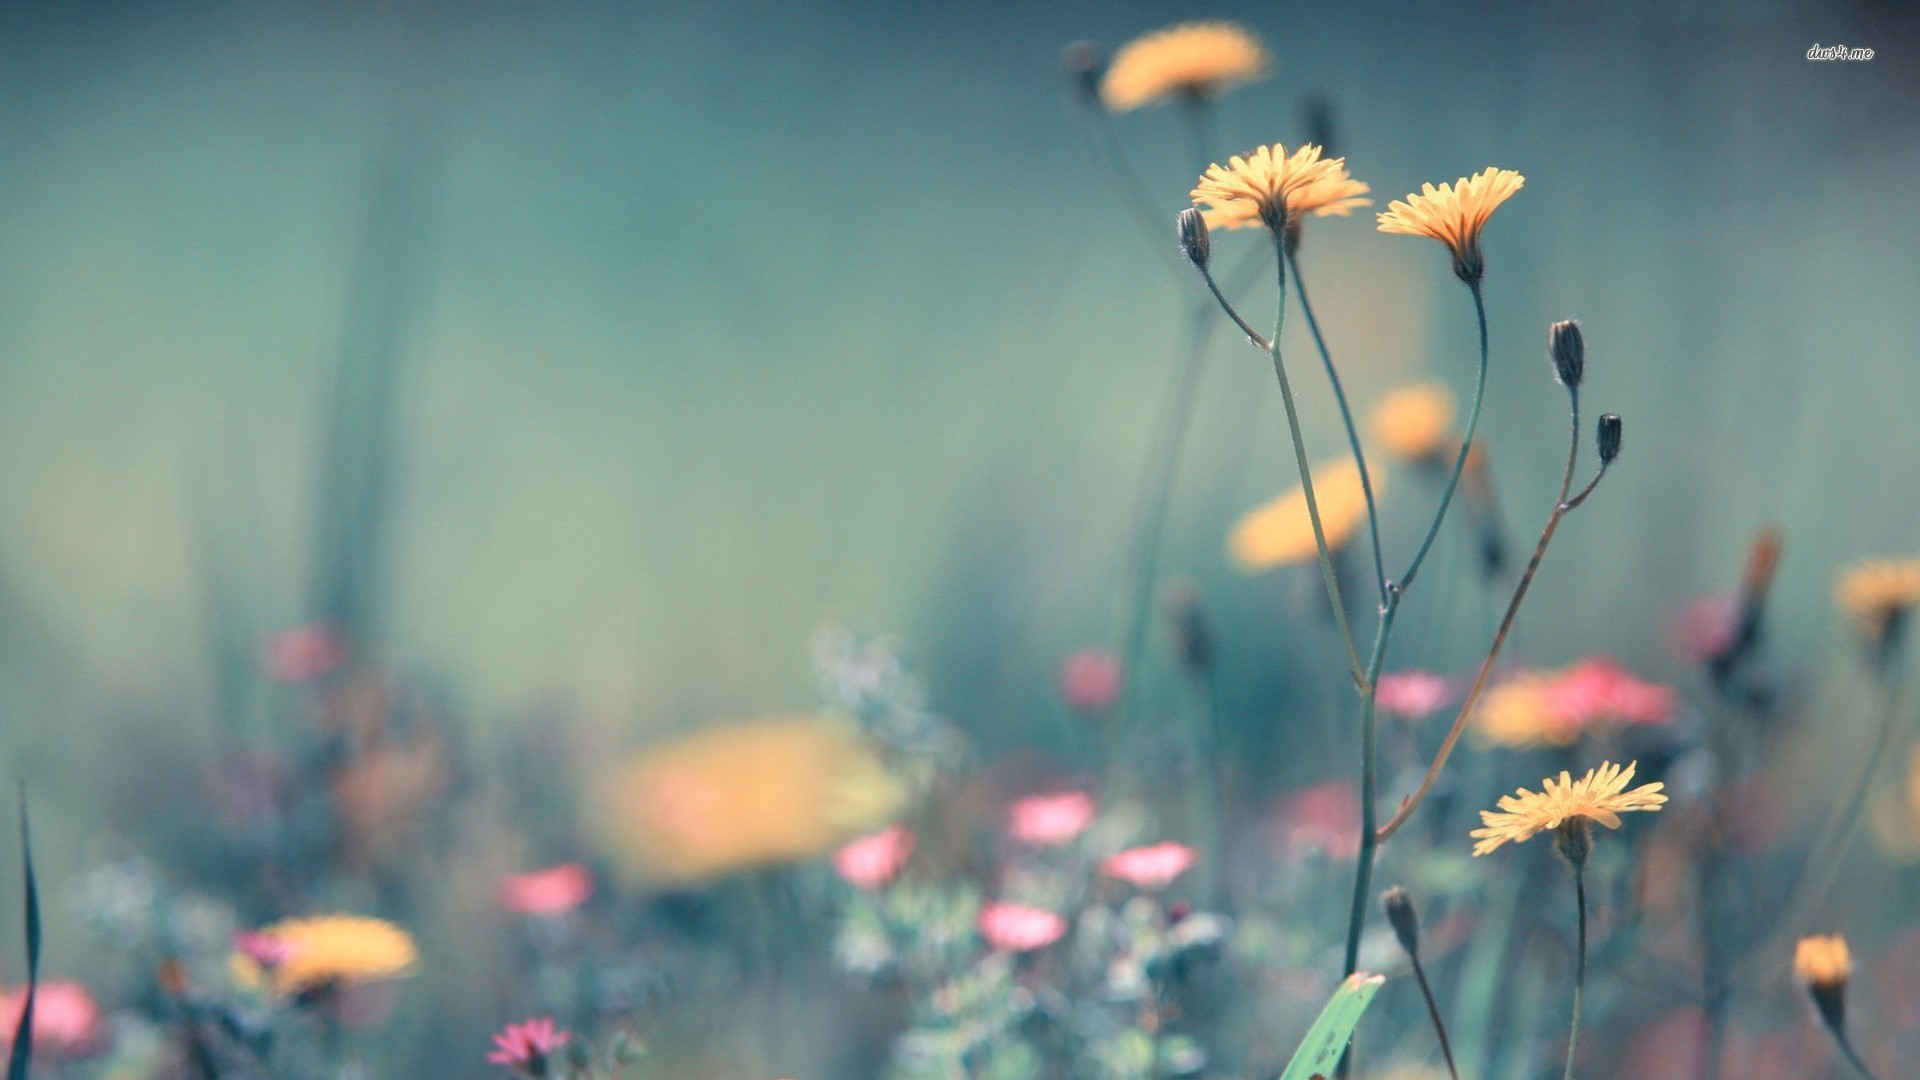 Free Wildflower Wallpapers 37098 1920x1080 px